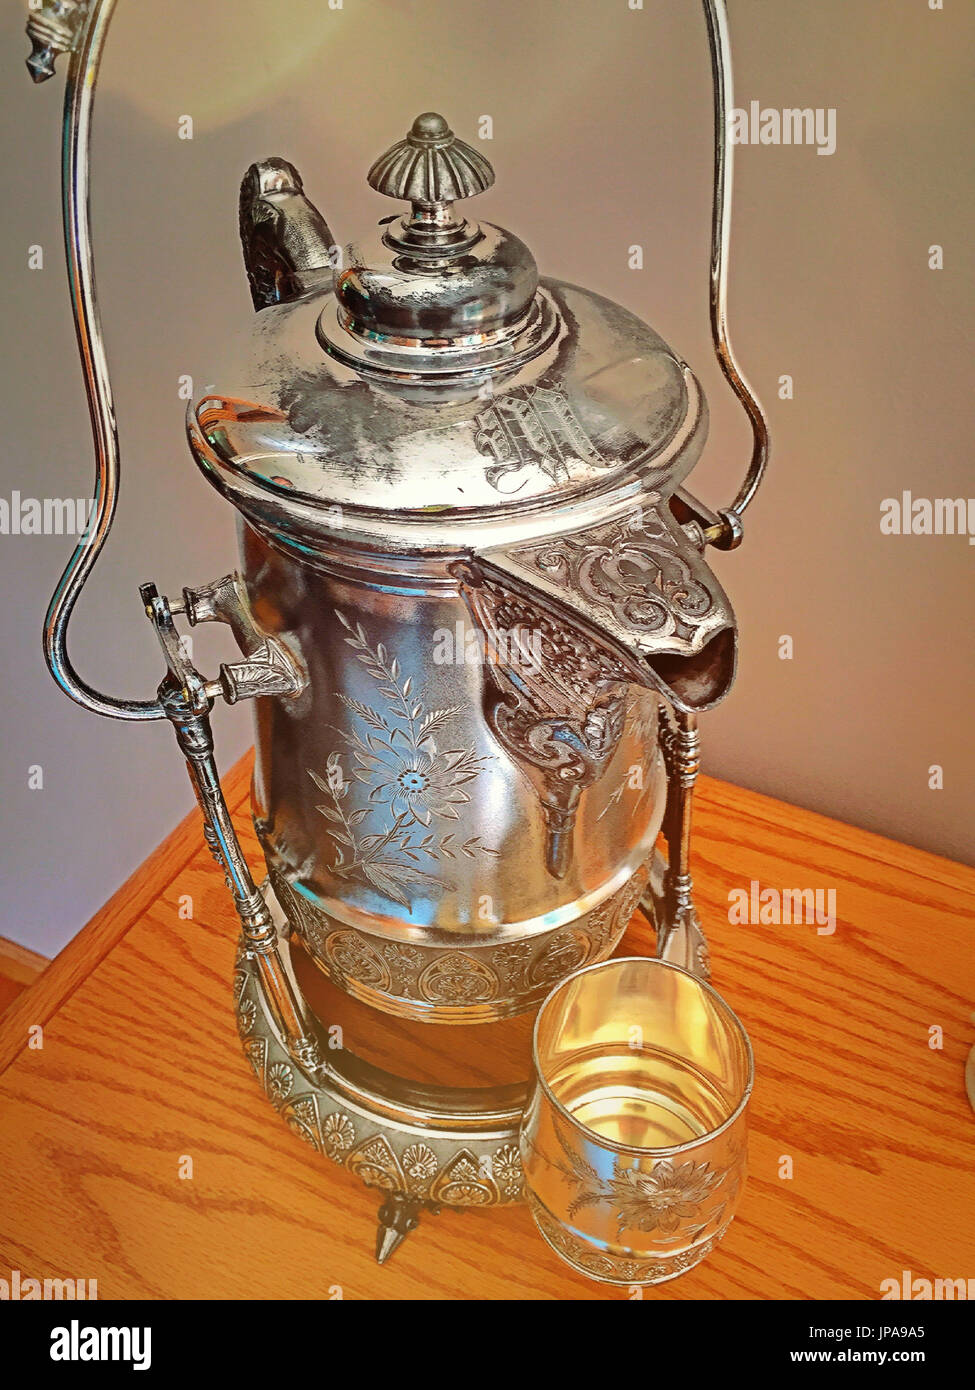 Shiny Vintage Metal Coffee Pot On White Table Stock Photo, Picture and  Royalty Free Image. Image 40463613.